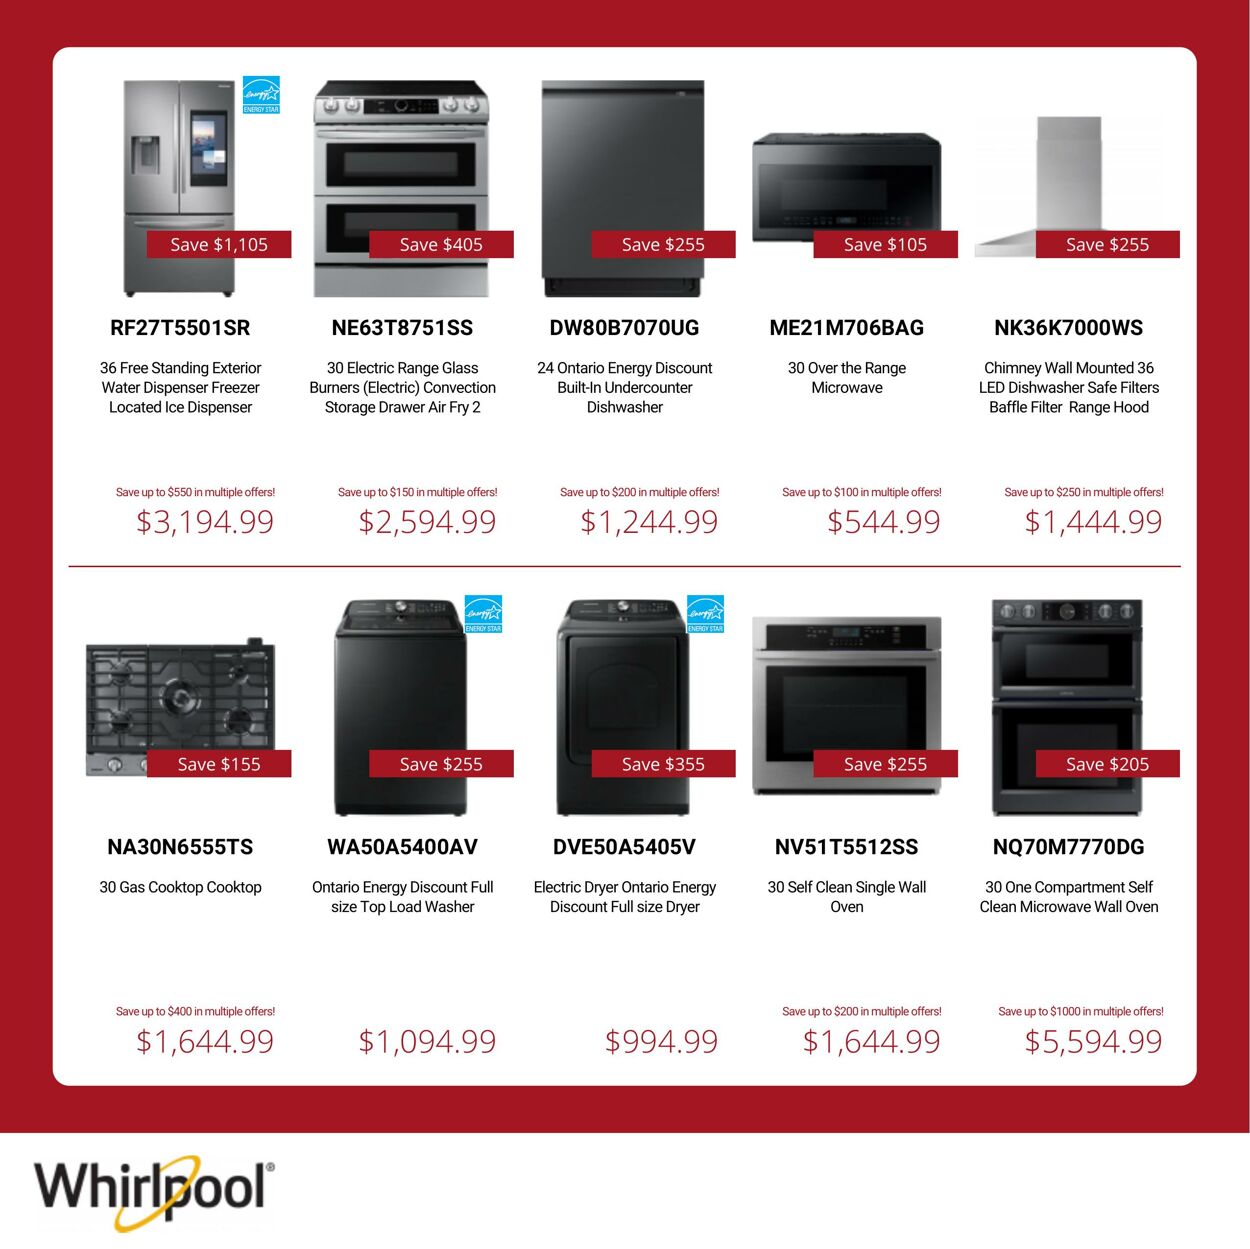 Flyer Canadian Appliance Source 17.11.2022 - 23.11.2022